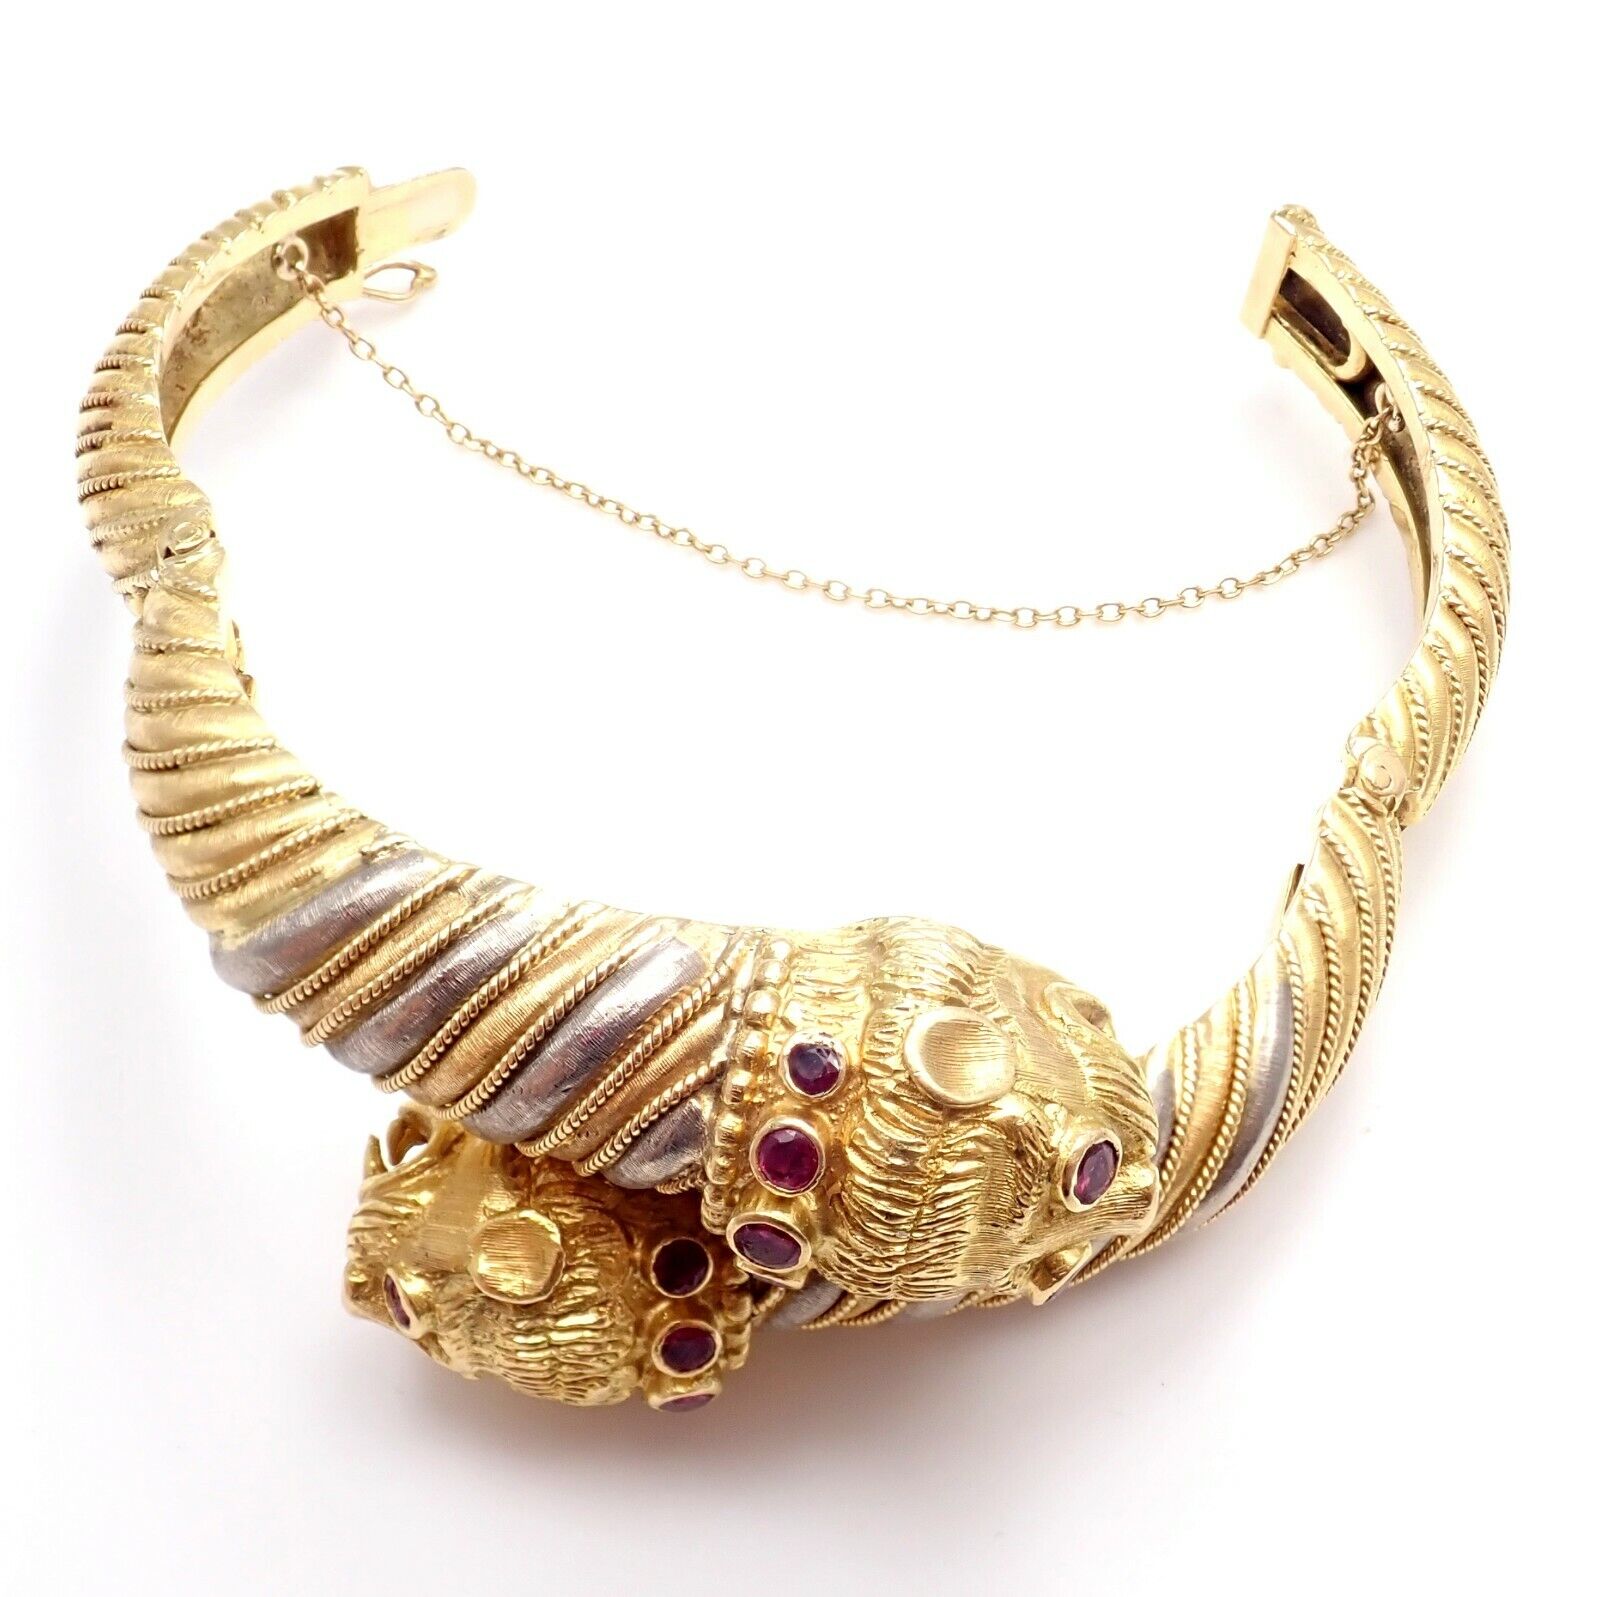 Lalaounis Jewelry & Watches:Vintage & Antique Jewelry:Bracelets & Charms Authentic! Ilias Lalaounis 18k Yellow White Gold Ruby Chimera Bangle Bracelet